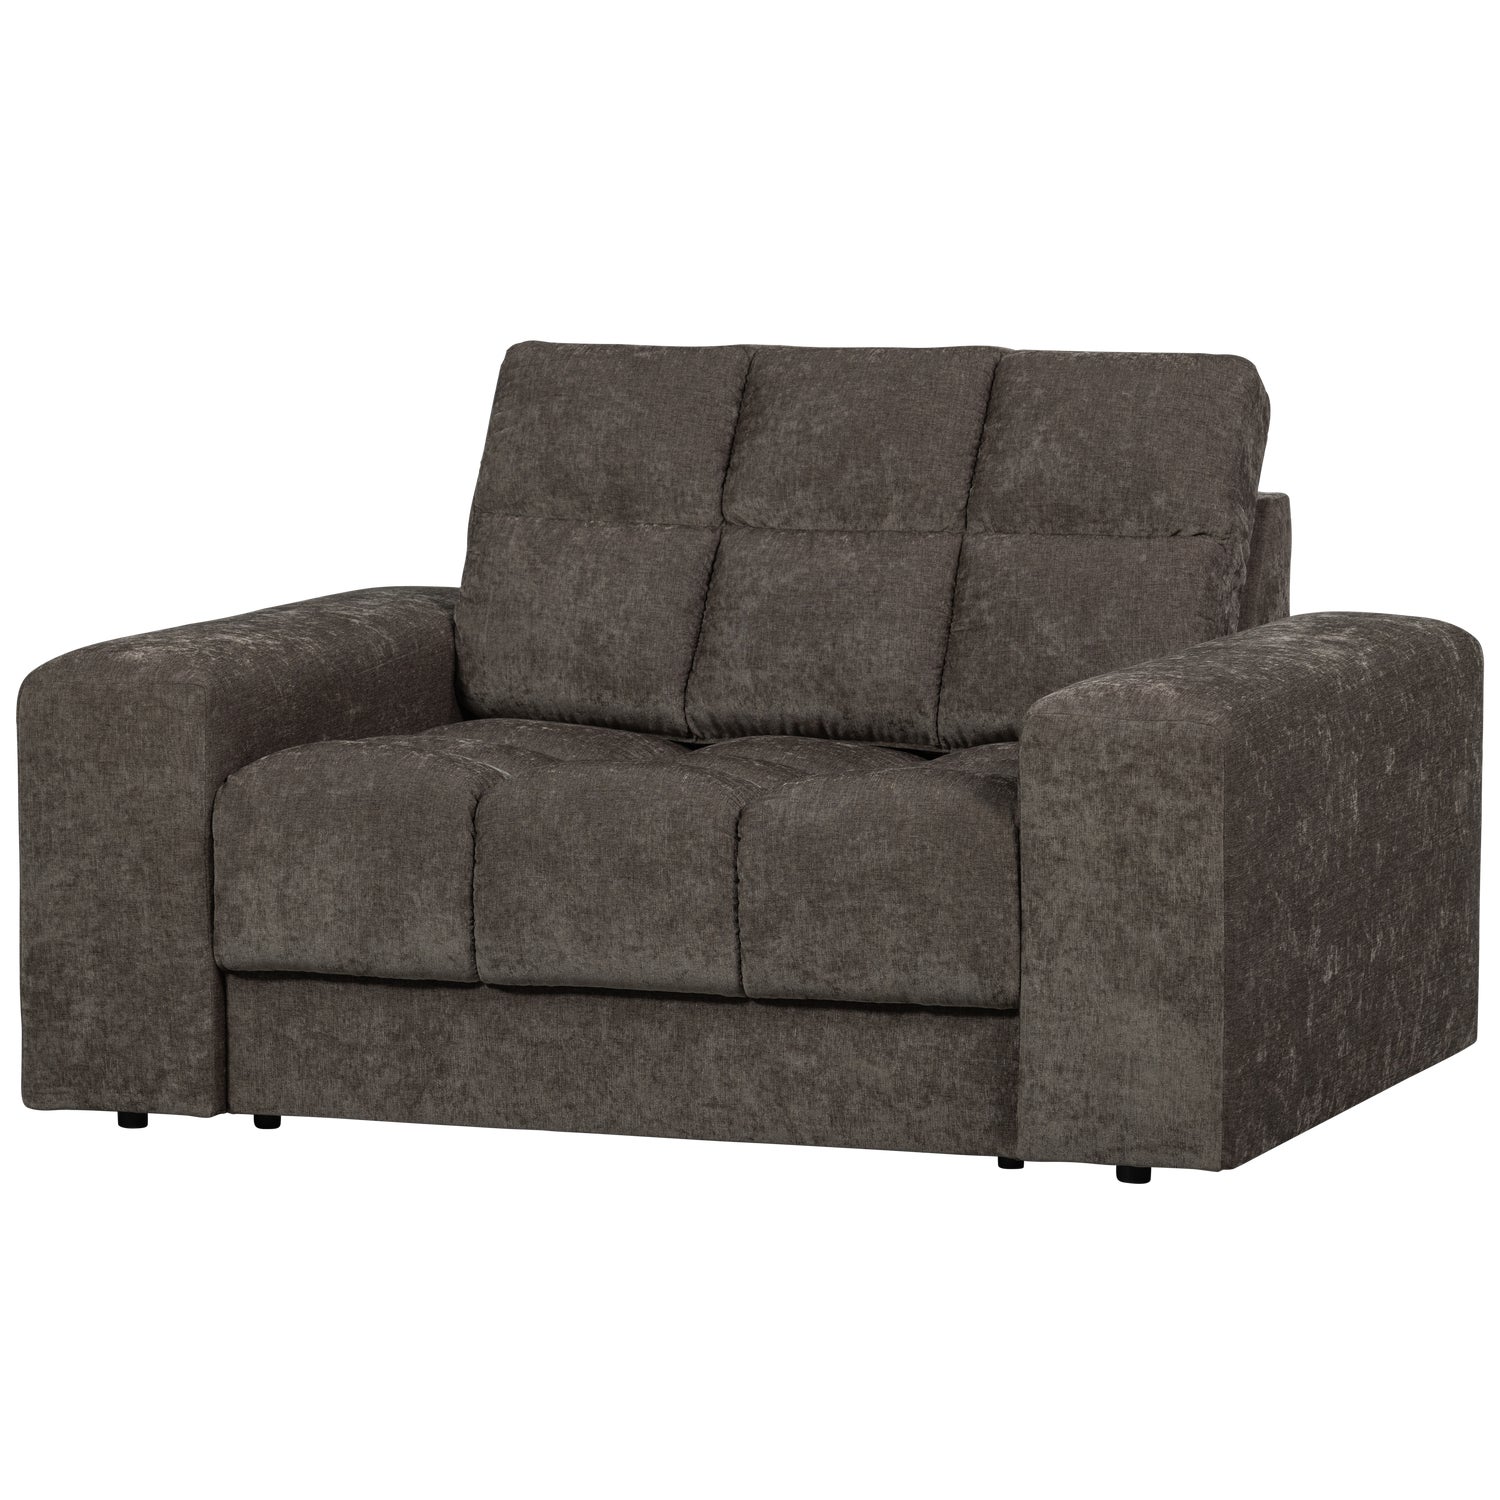 379006-W-02_VS_WE_Second_date_loveseat_vintage_warm_grijs_SA.png?auto=webp&format=png&width=1500&height=1500